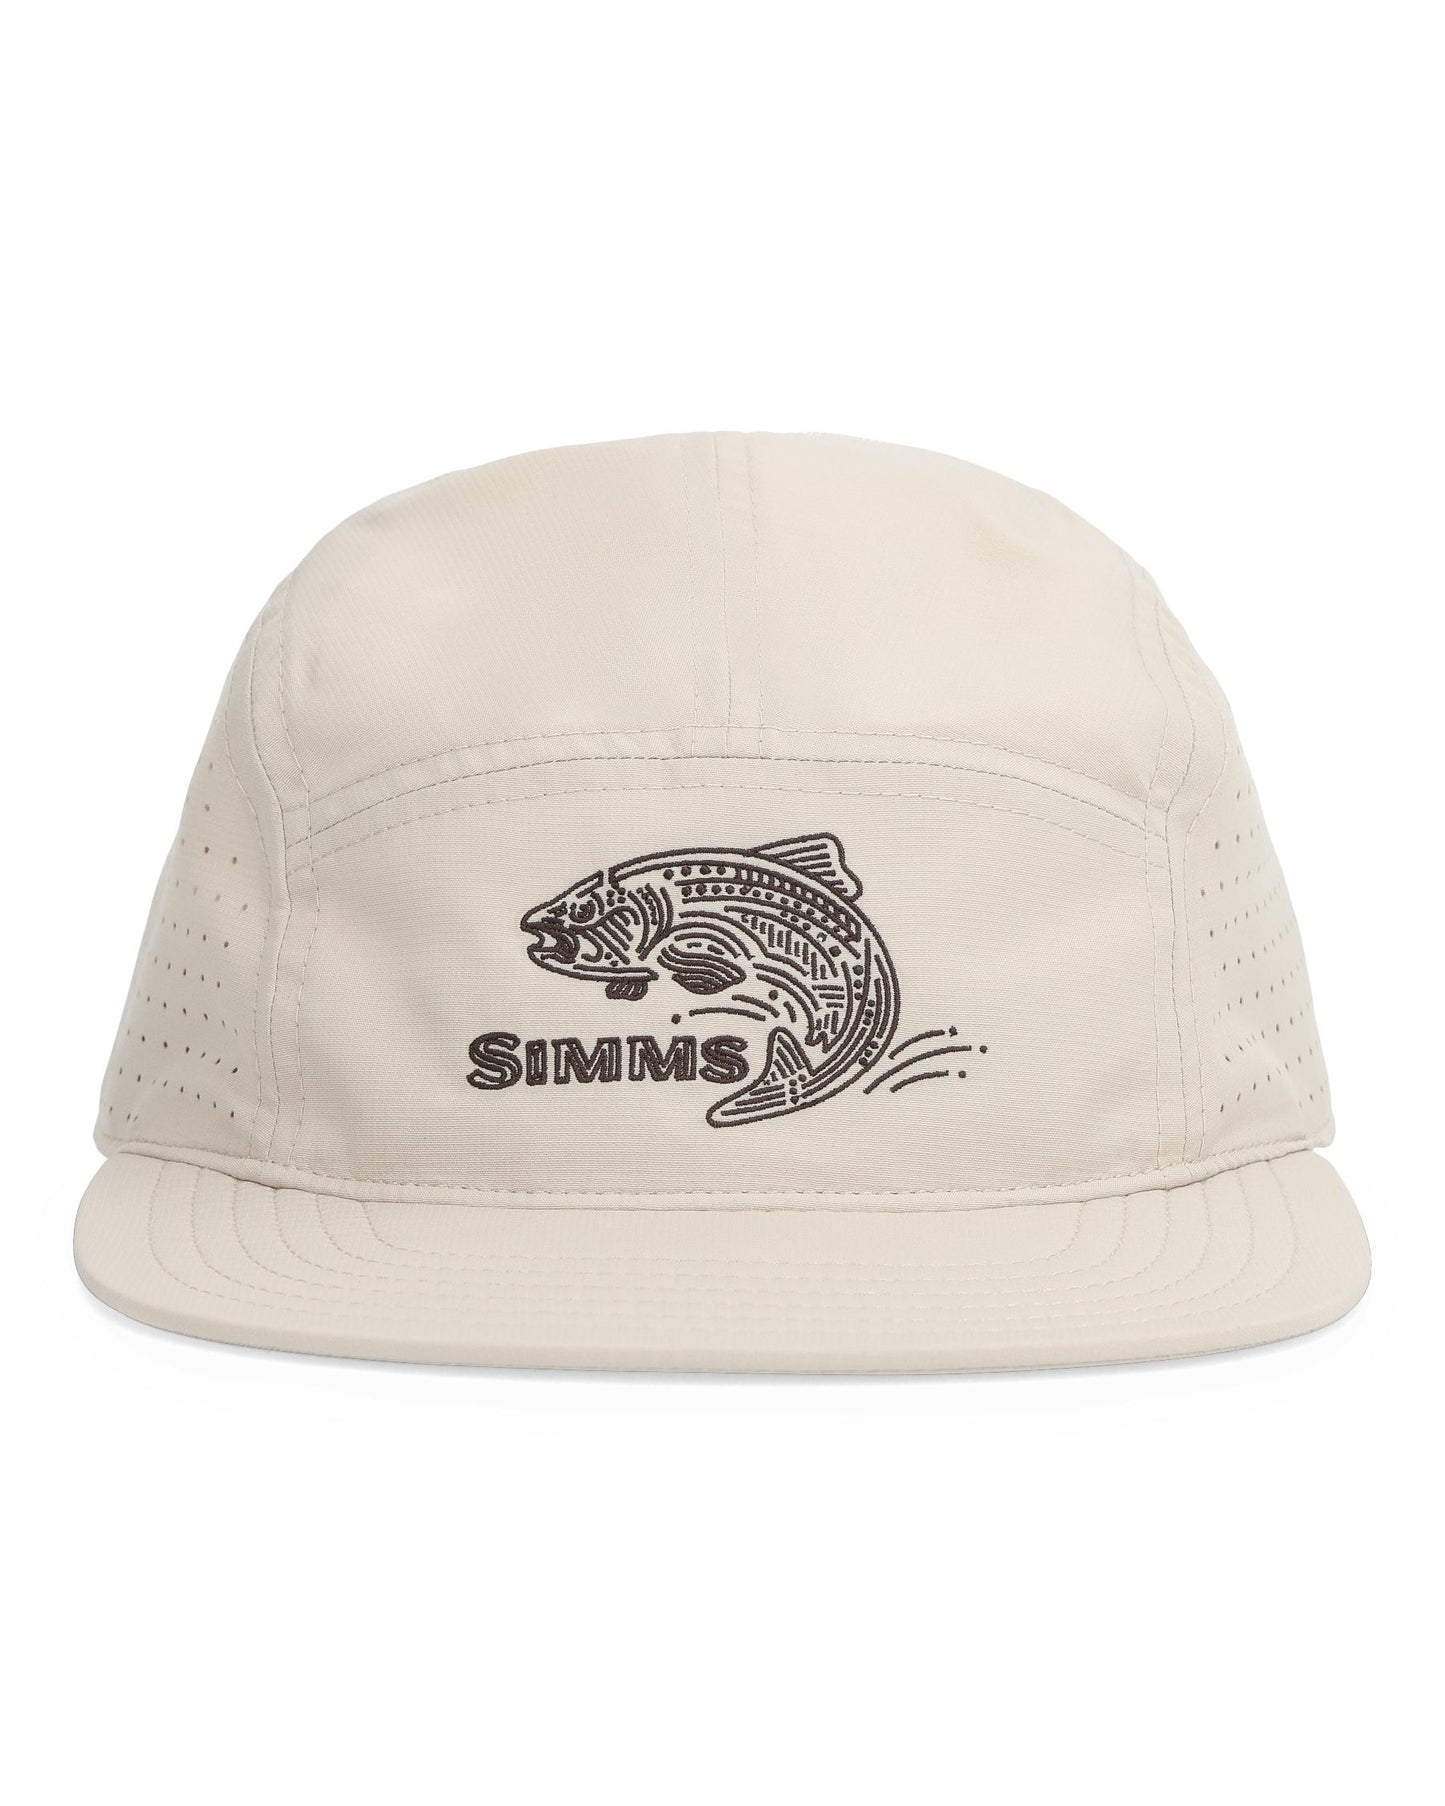 Single Haul Pack Cap  Simms Fishing Products